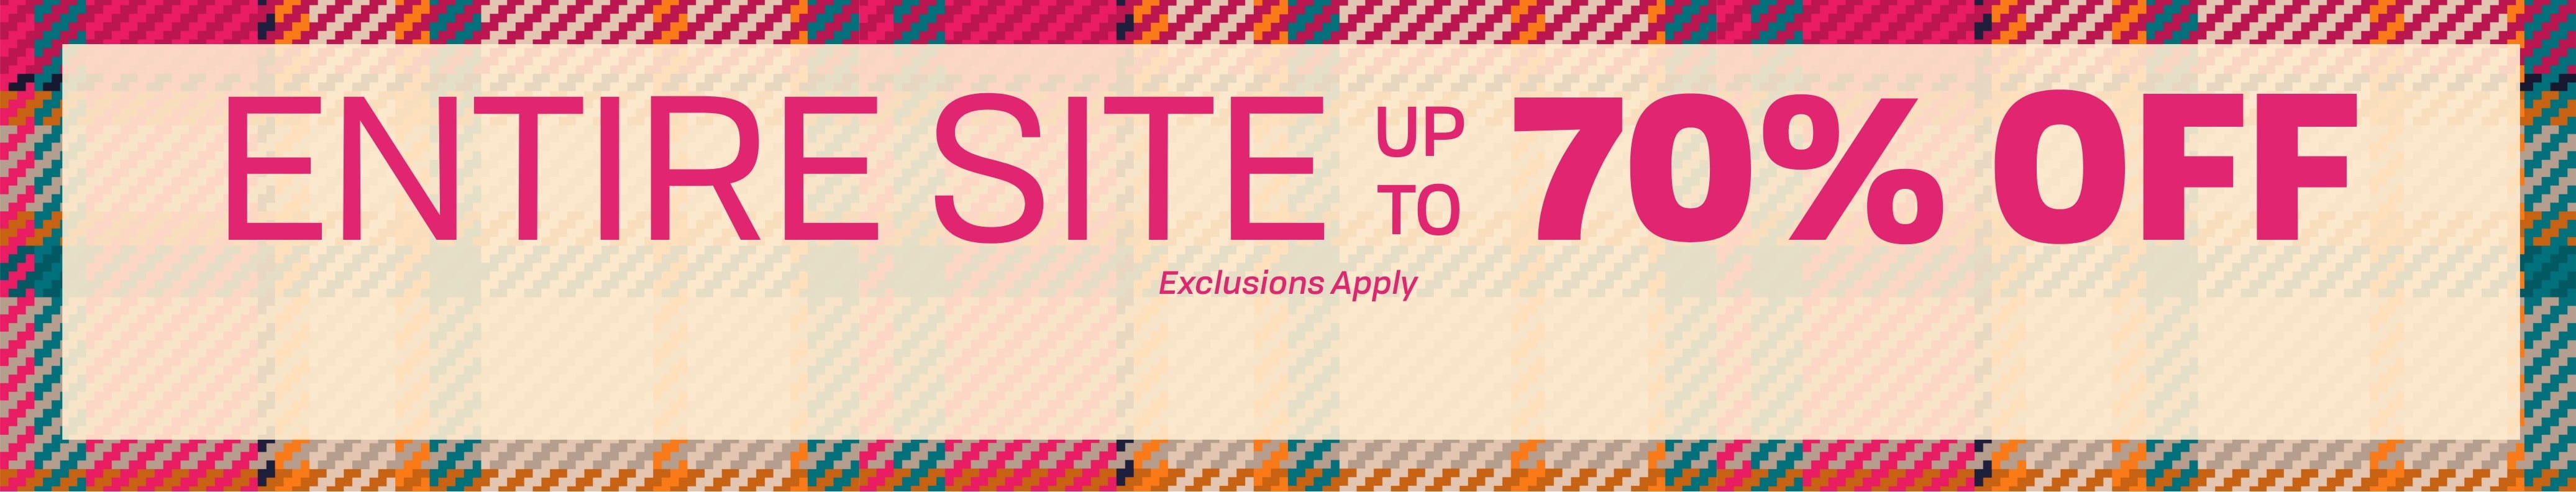 Entire Site up to 70% Off Exclusions Apply